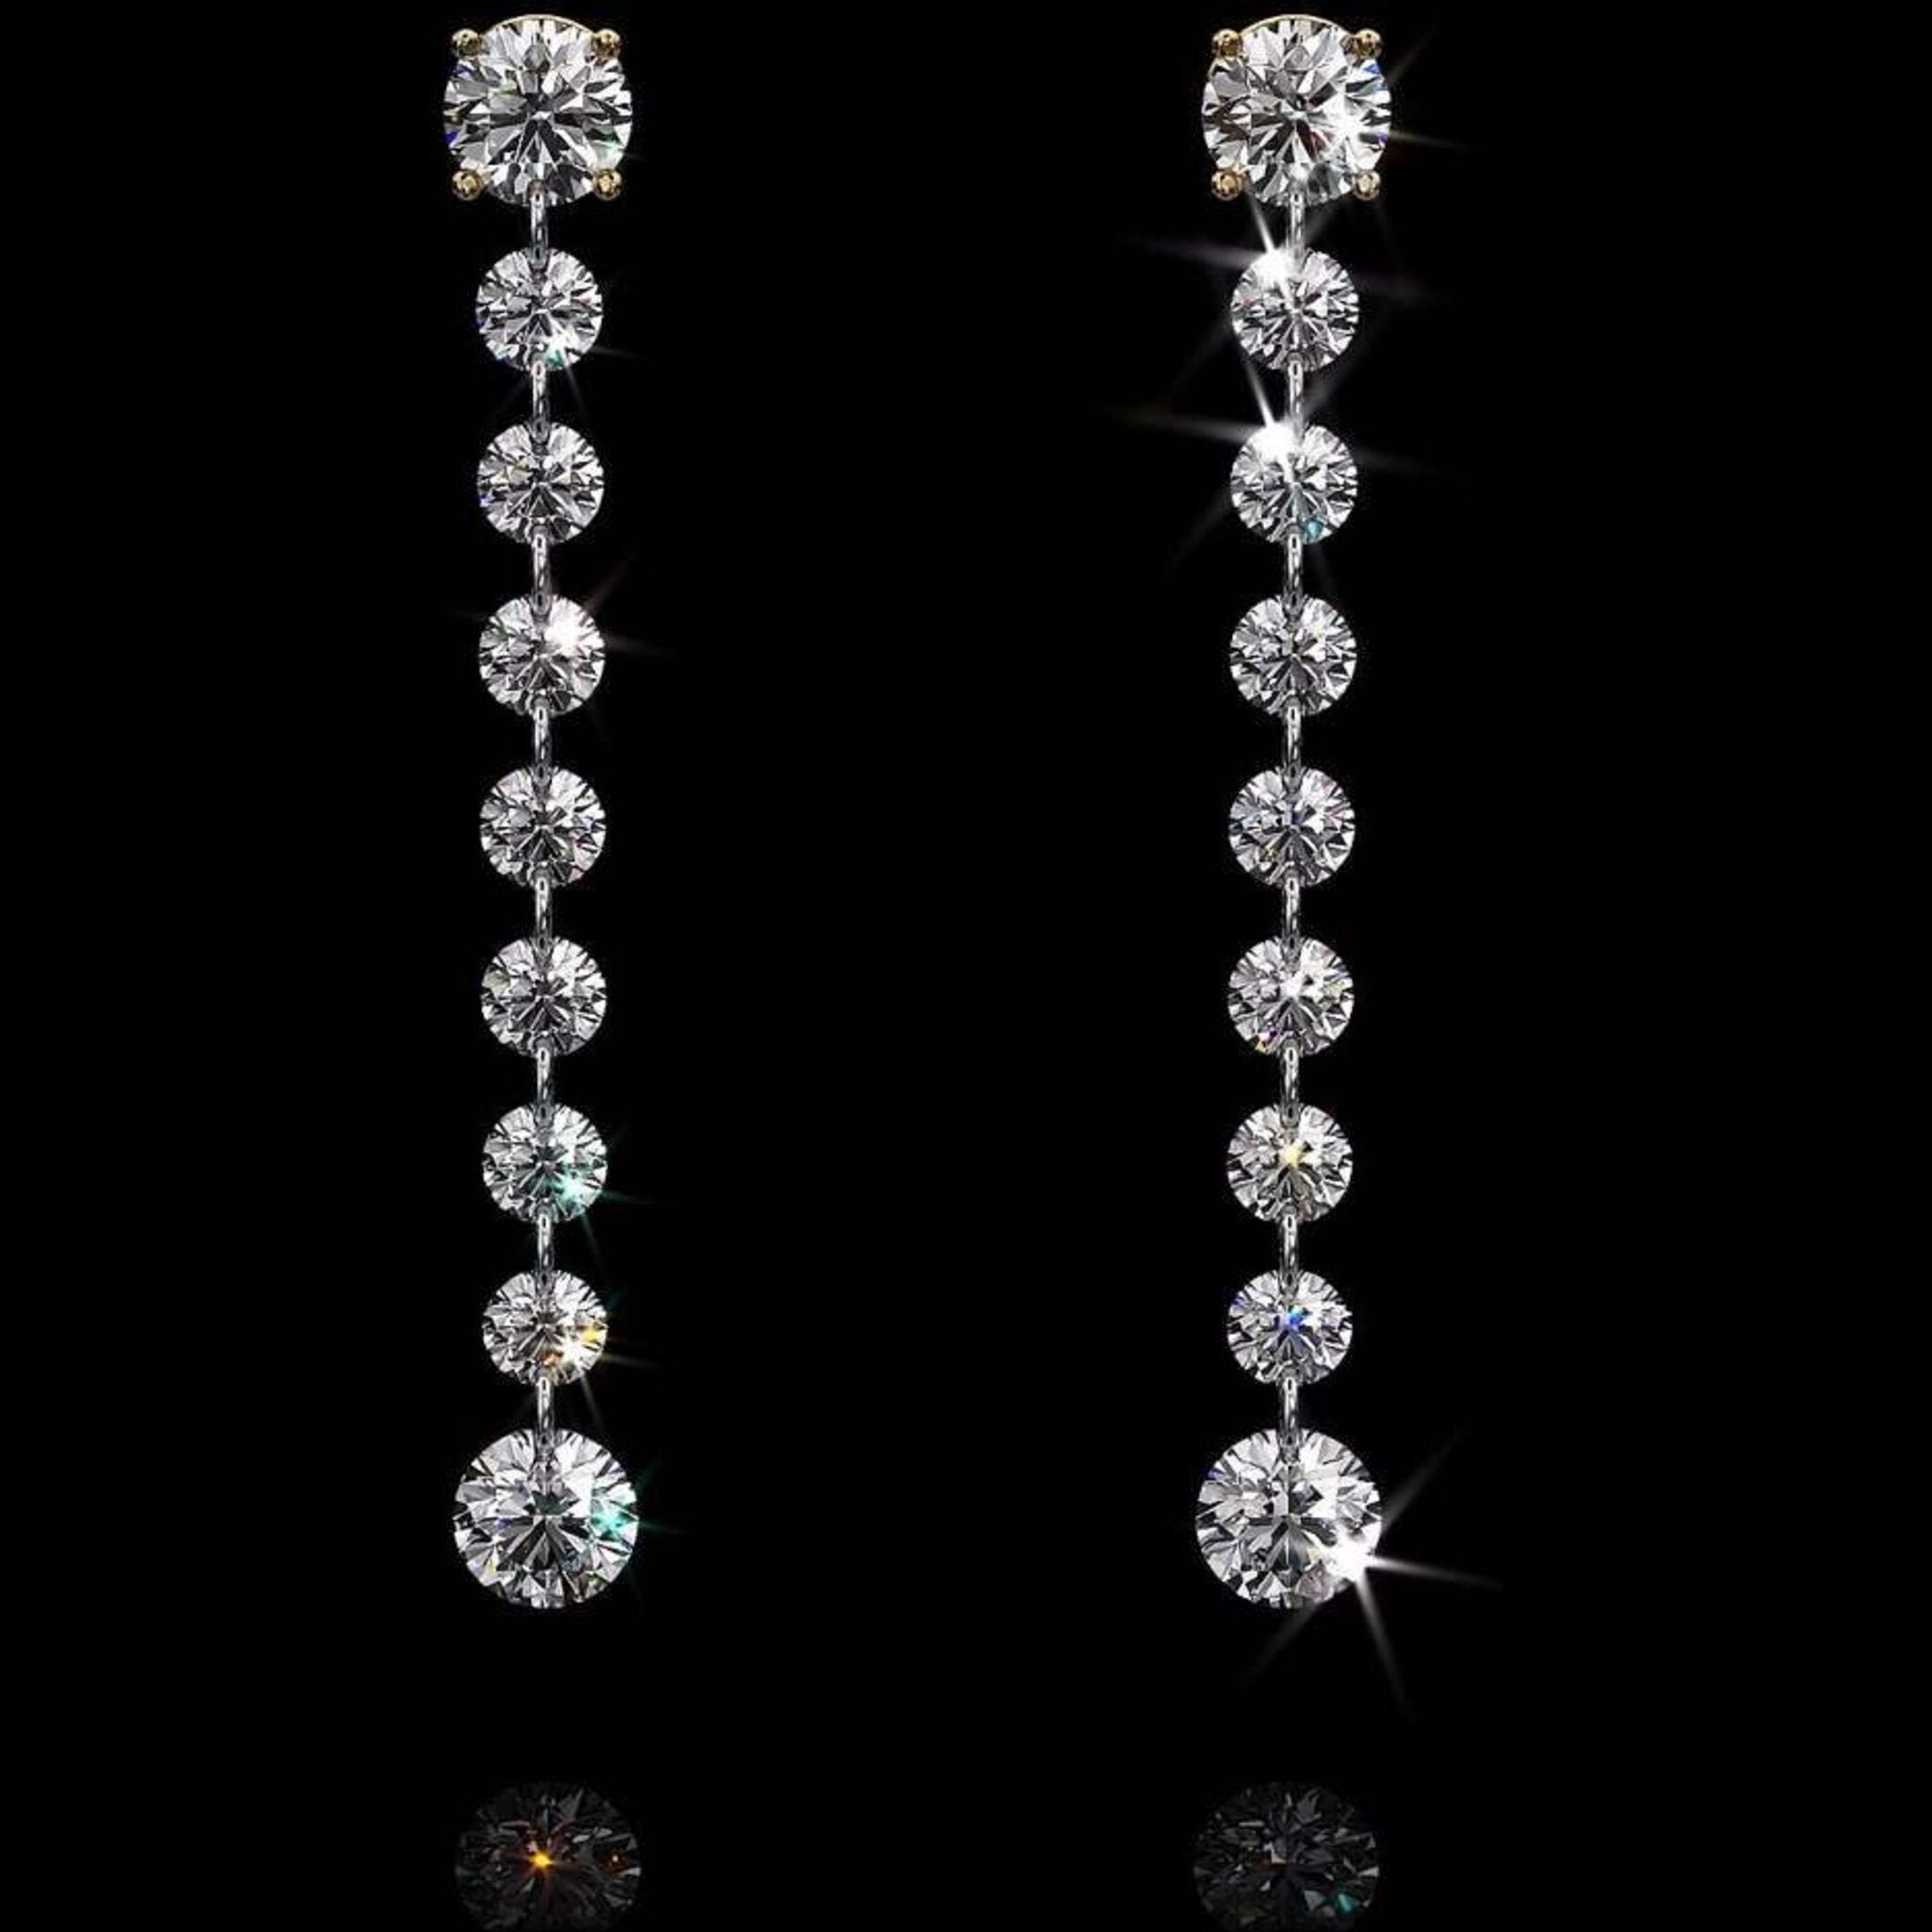 Aresa New York - Hesse No. 9 Earrings - 18K Yellow Gold with 2.60 cts. of Diamonds